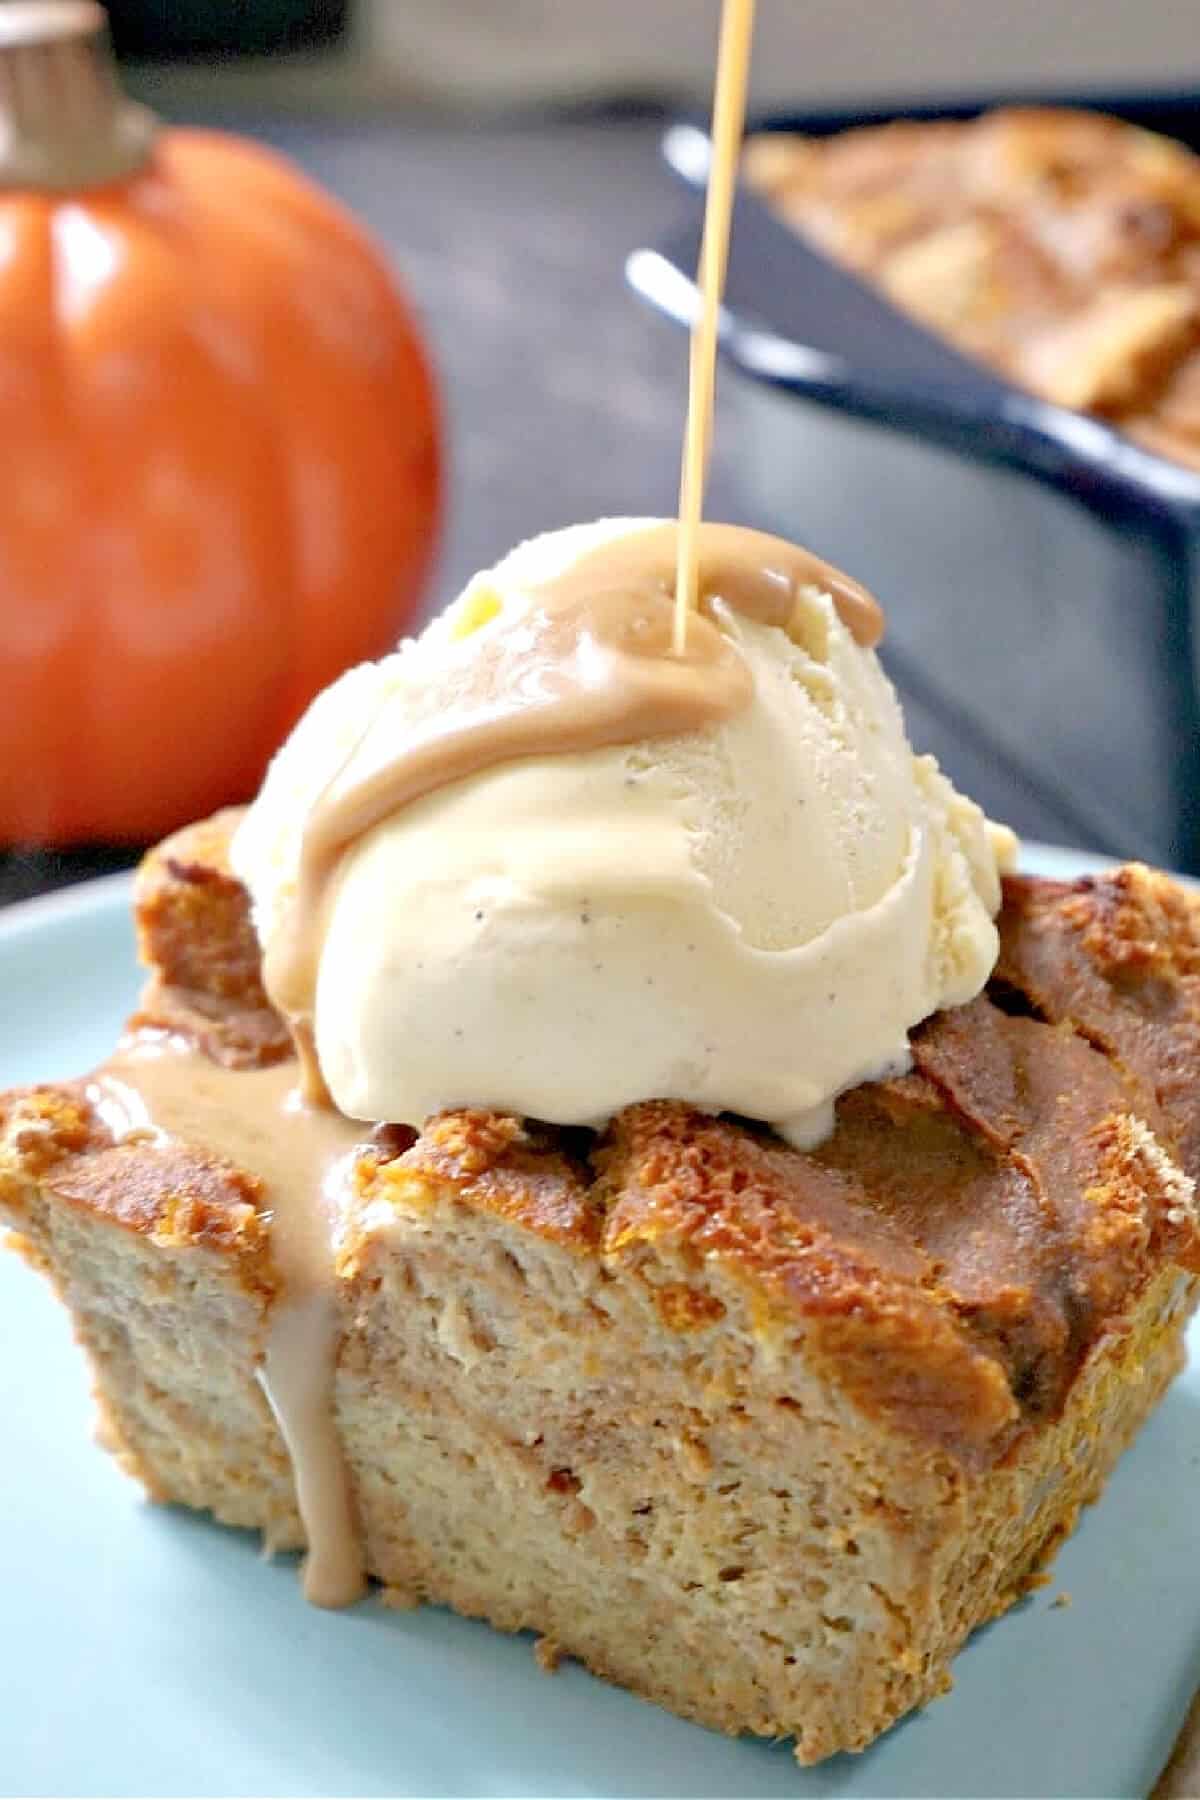 Butterscotch being poured over a slice of pumpkin bread pudding with vanilla ice cream.